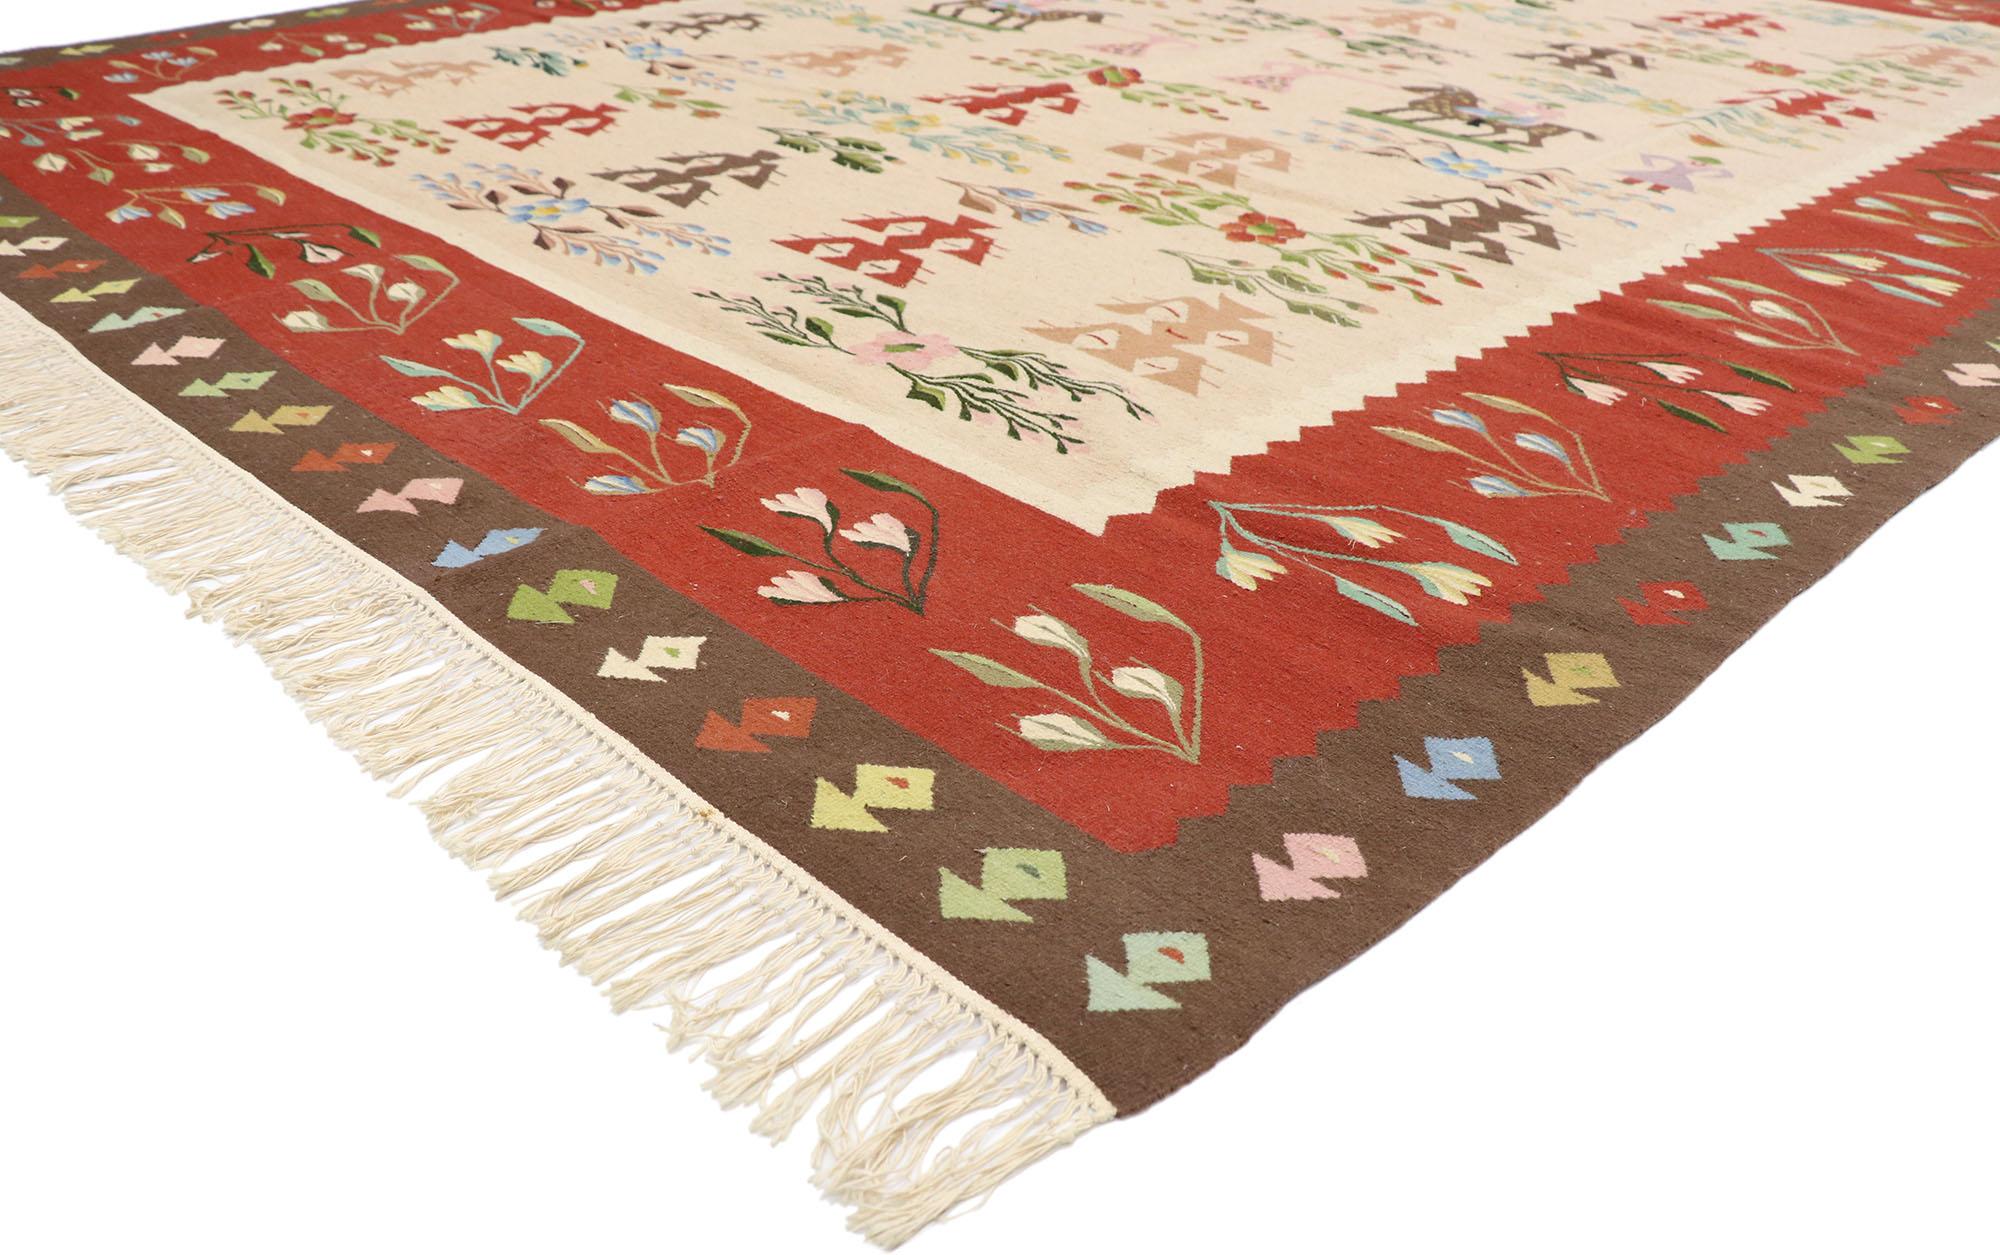 77920 vintage Romanian Kilim rug with Folk Art style 09'00 x 11'09. Full of tiny details and a bold expressive design combined with folk art style, this hand-woven wool vintage Romanian kilim rug is a captivating vision of woven beauty. The abrashed